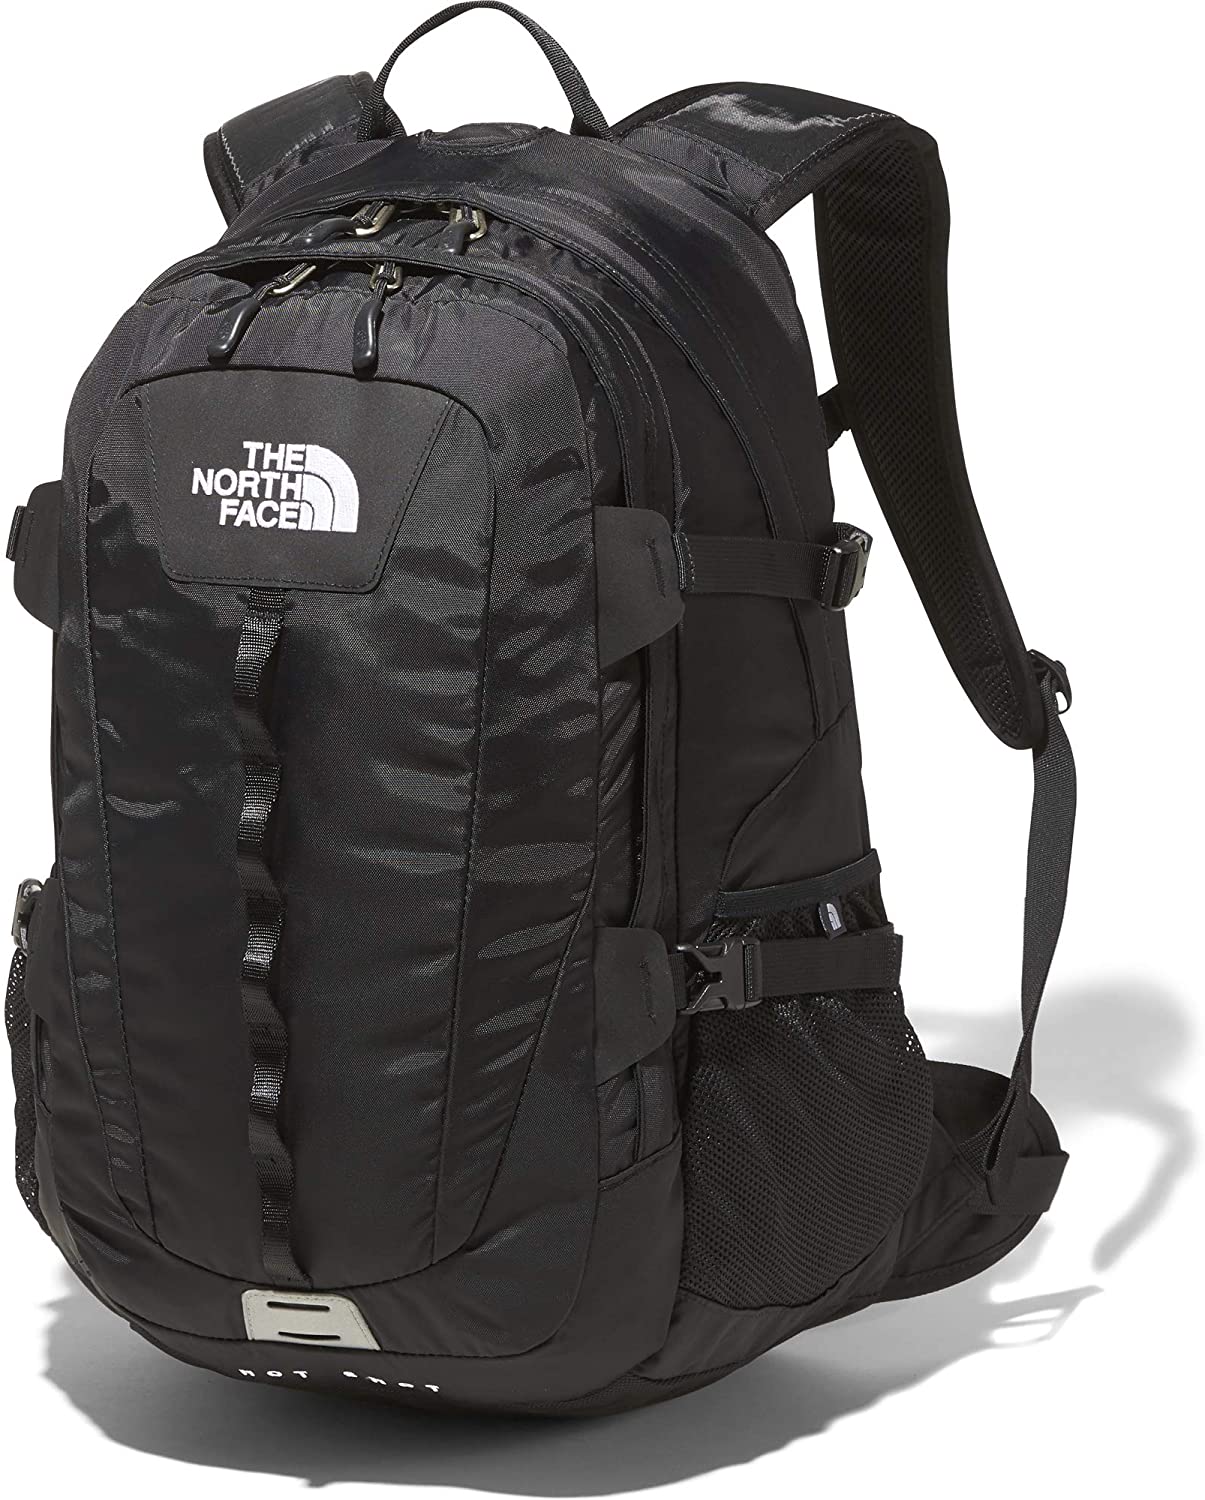 [THE NORTH FACE] HOT SHOT CL NM72006 BK